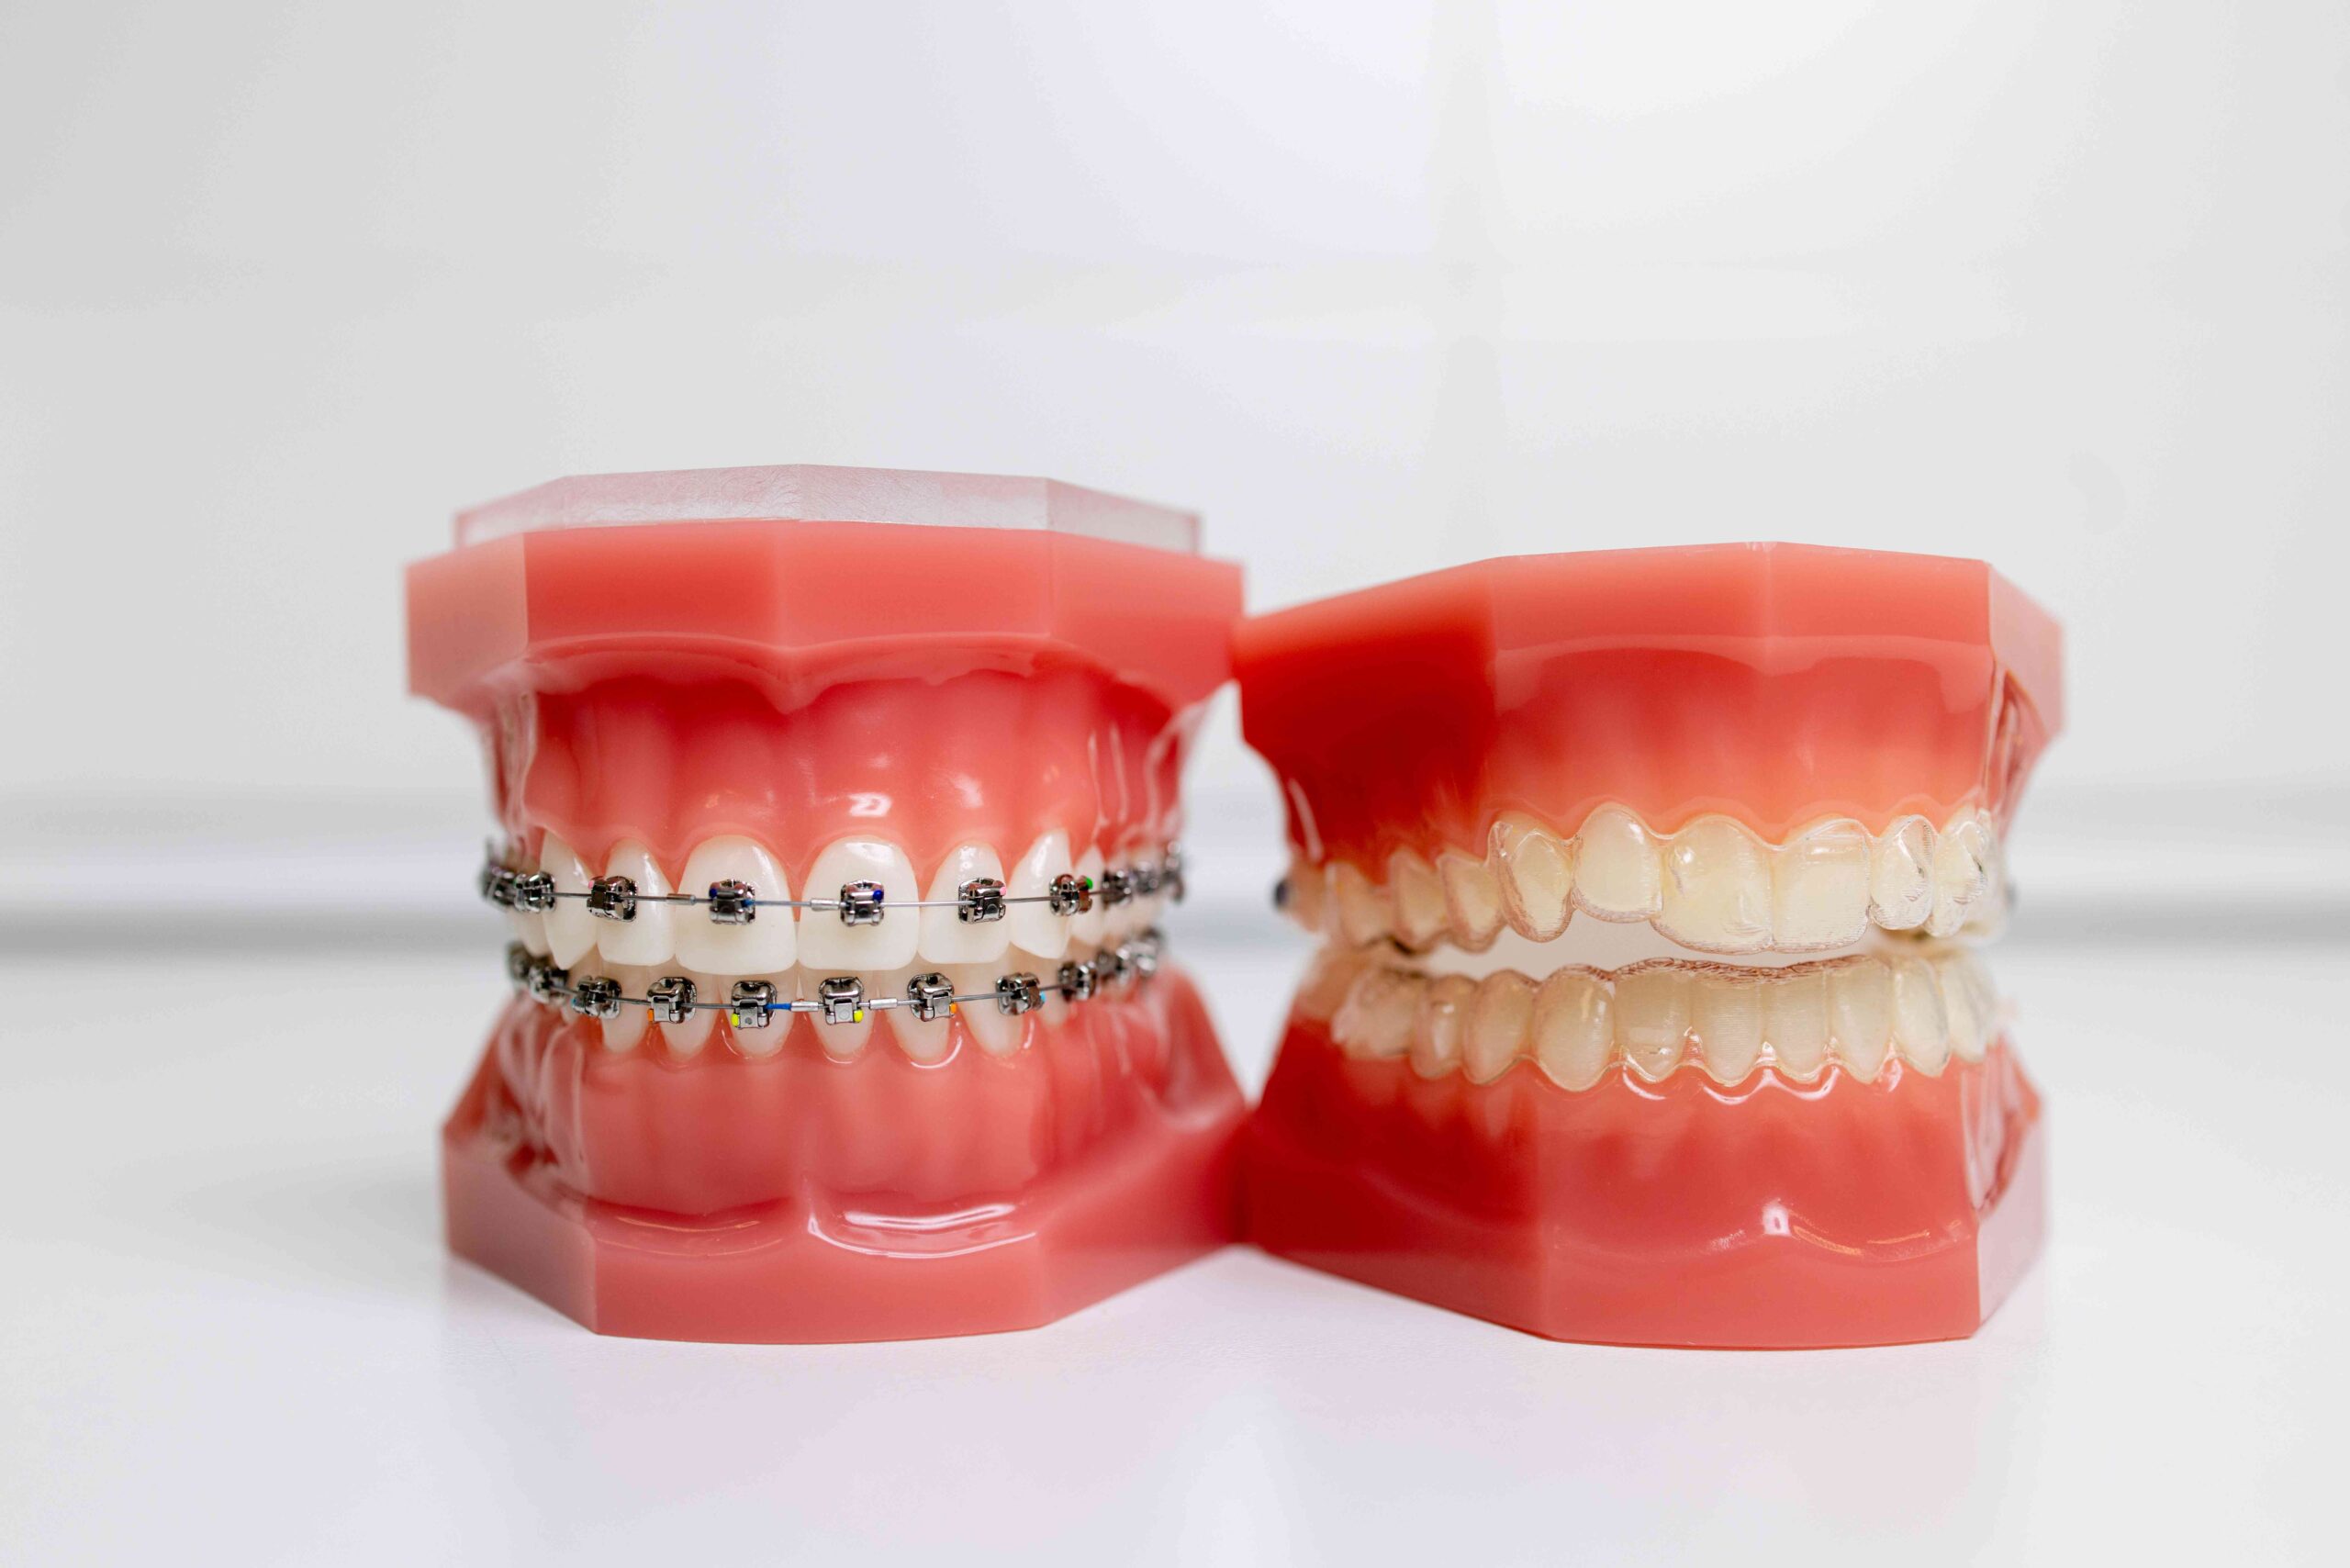 Clear Aligners VS Traditional Braces